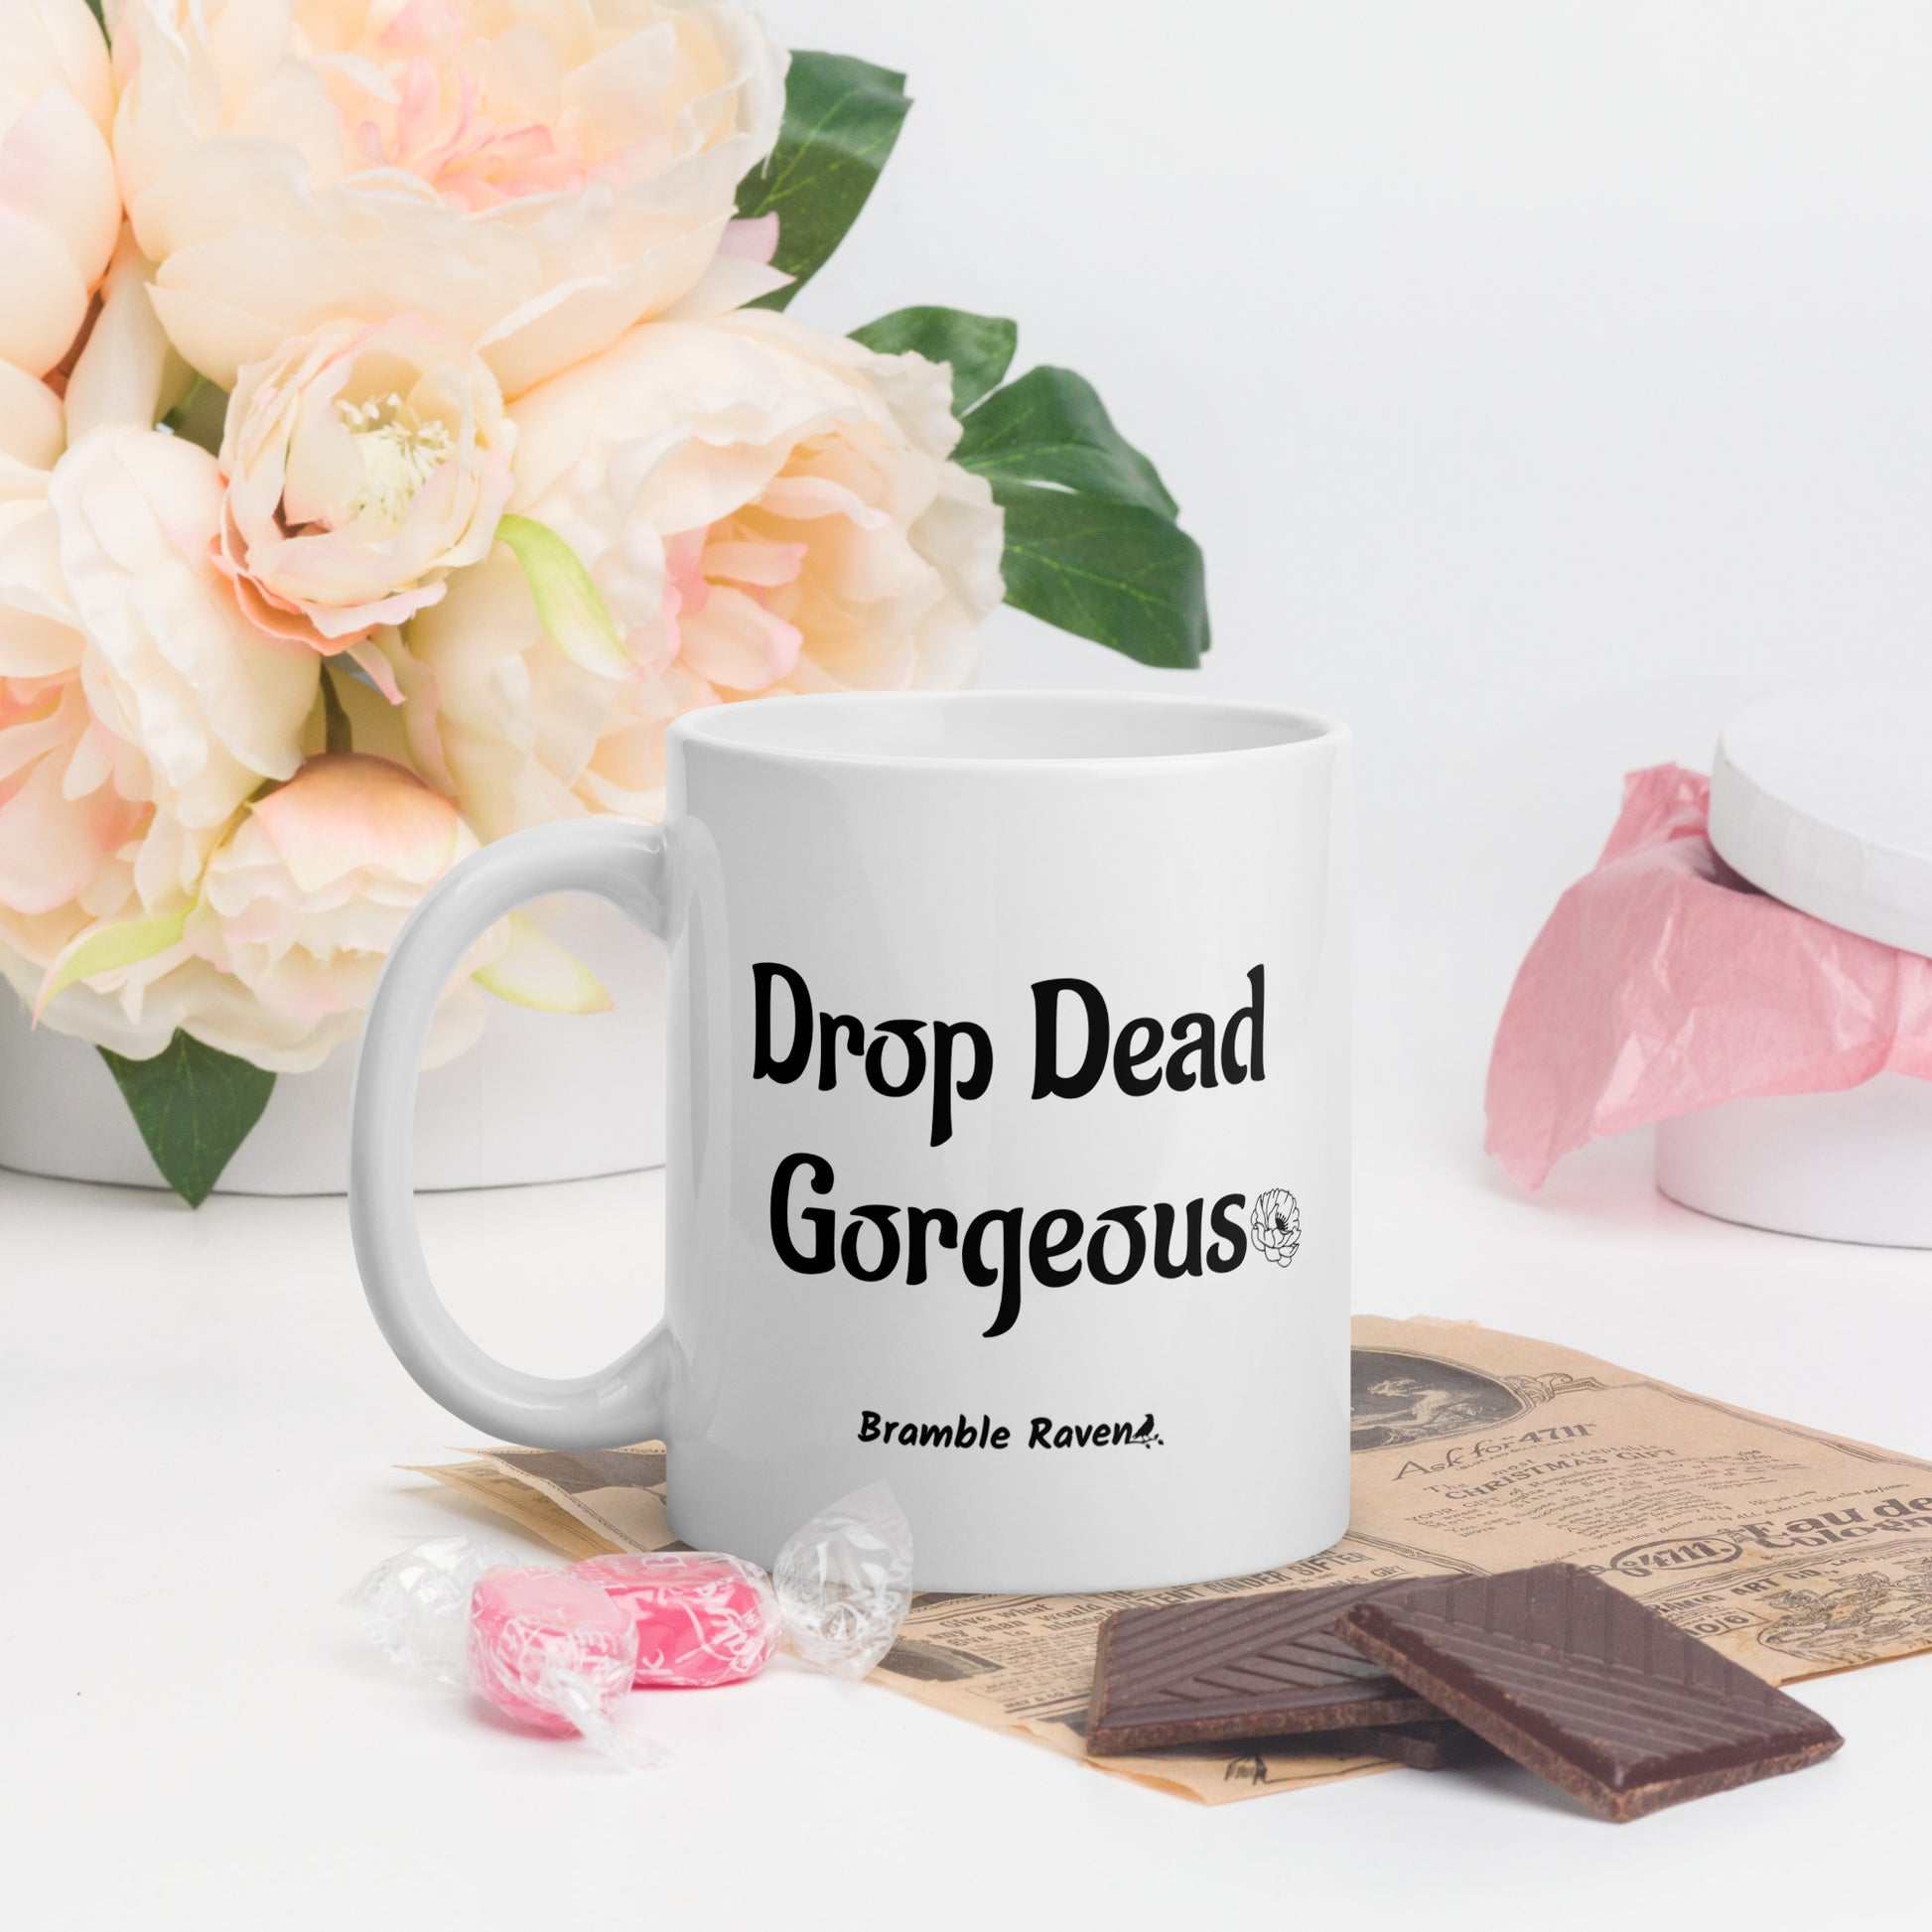 11 ounce white ceramic mug. Features illustrated deer skull wreathed in flowers on one side and Drop dead gorgeous text on the other side. Dishwasher and microwave safe. Shown by flowers and chocolate.